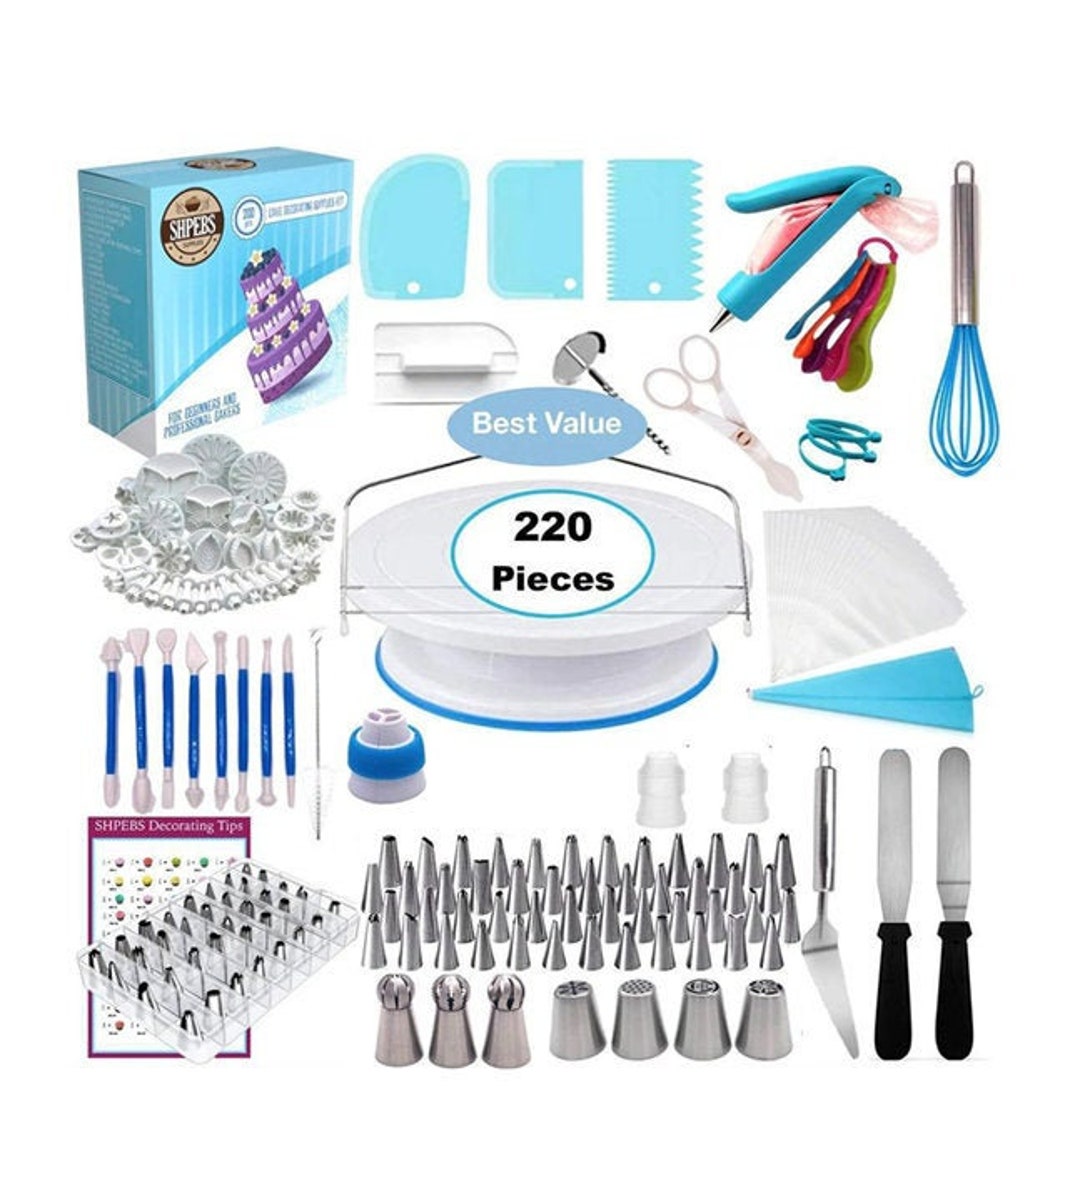 124 Pieces Cake Decorating Supplies Kit for Beginners 